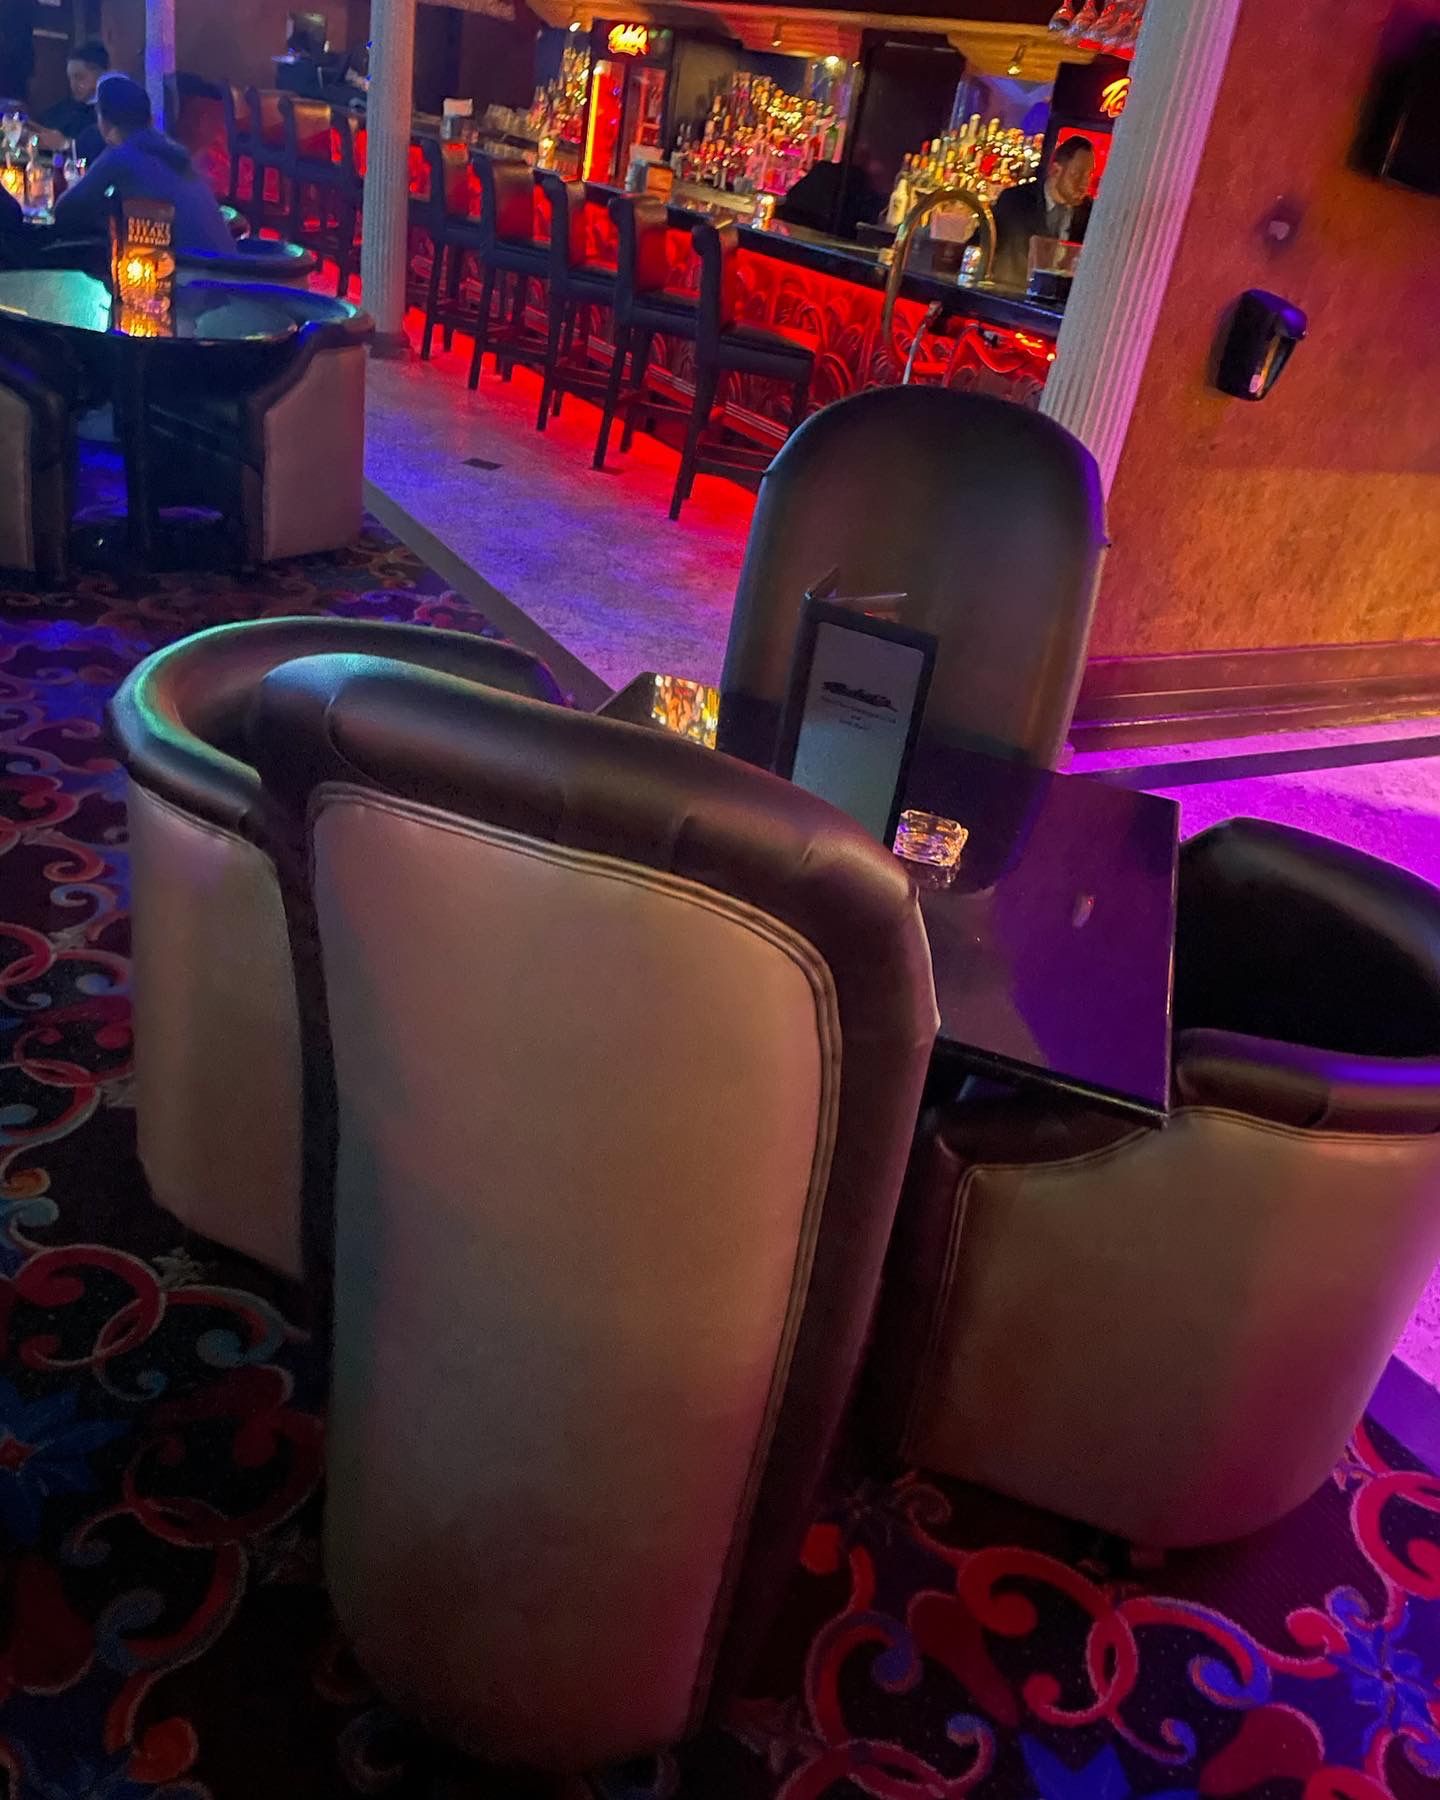 nightclub table with dining chairs